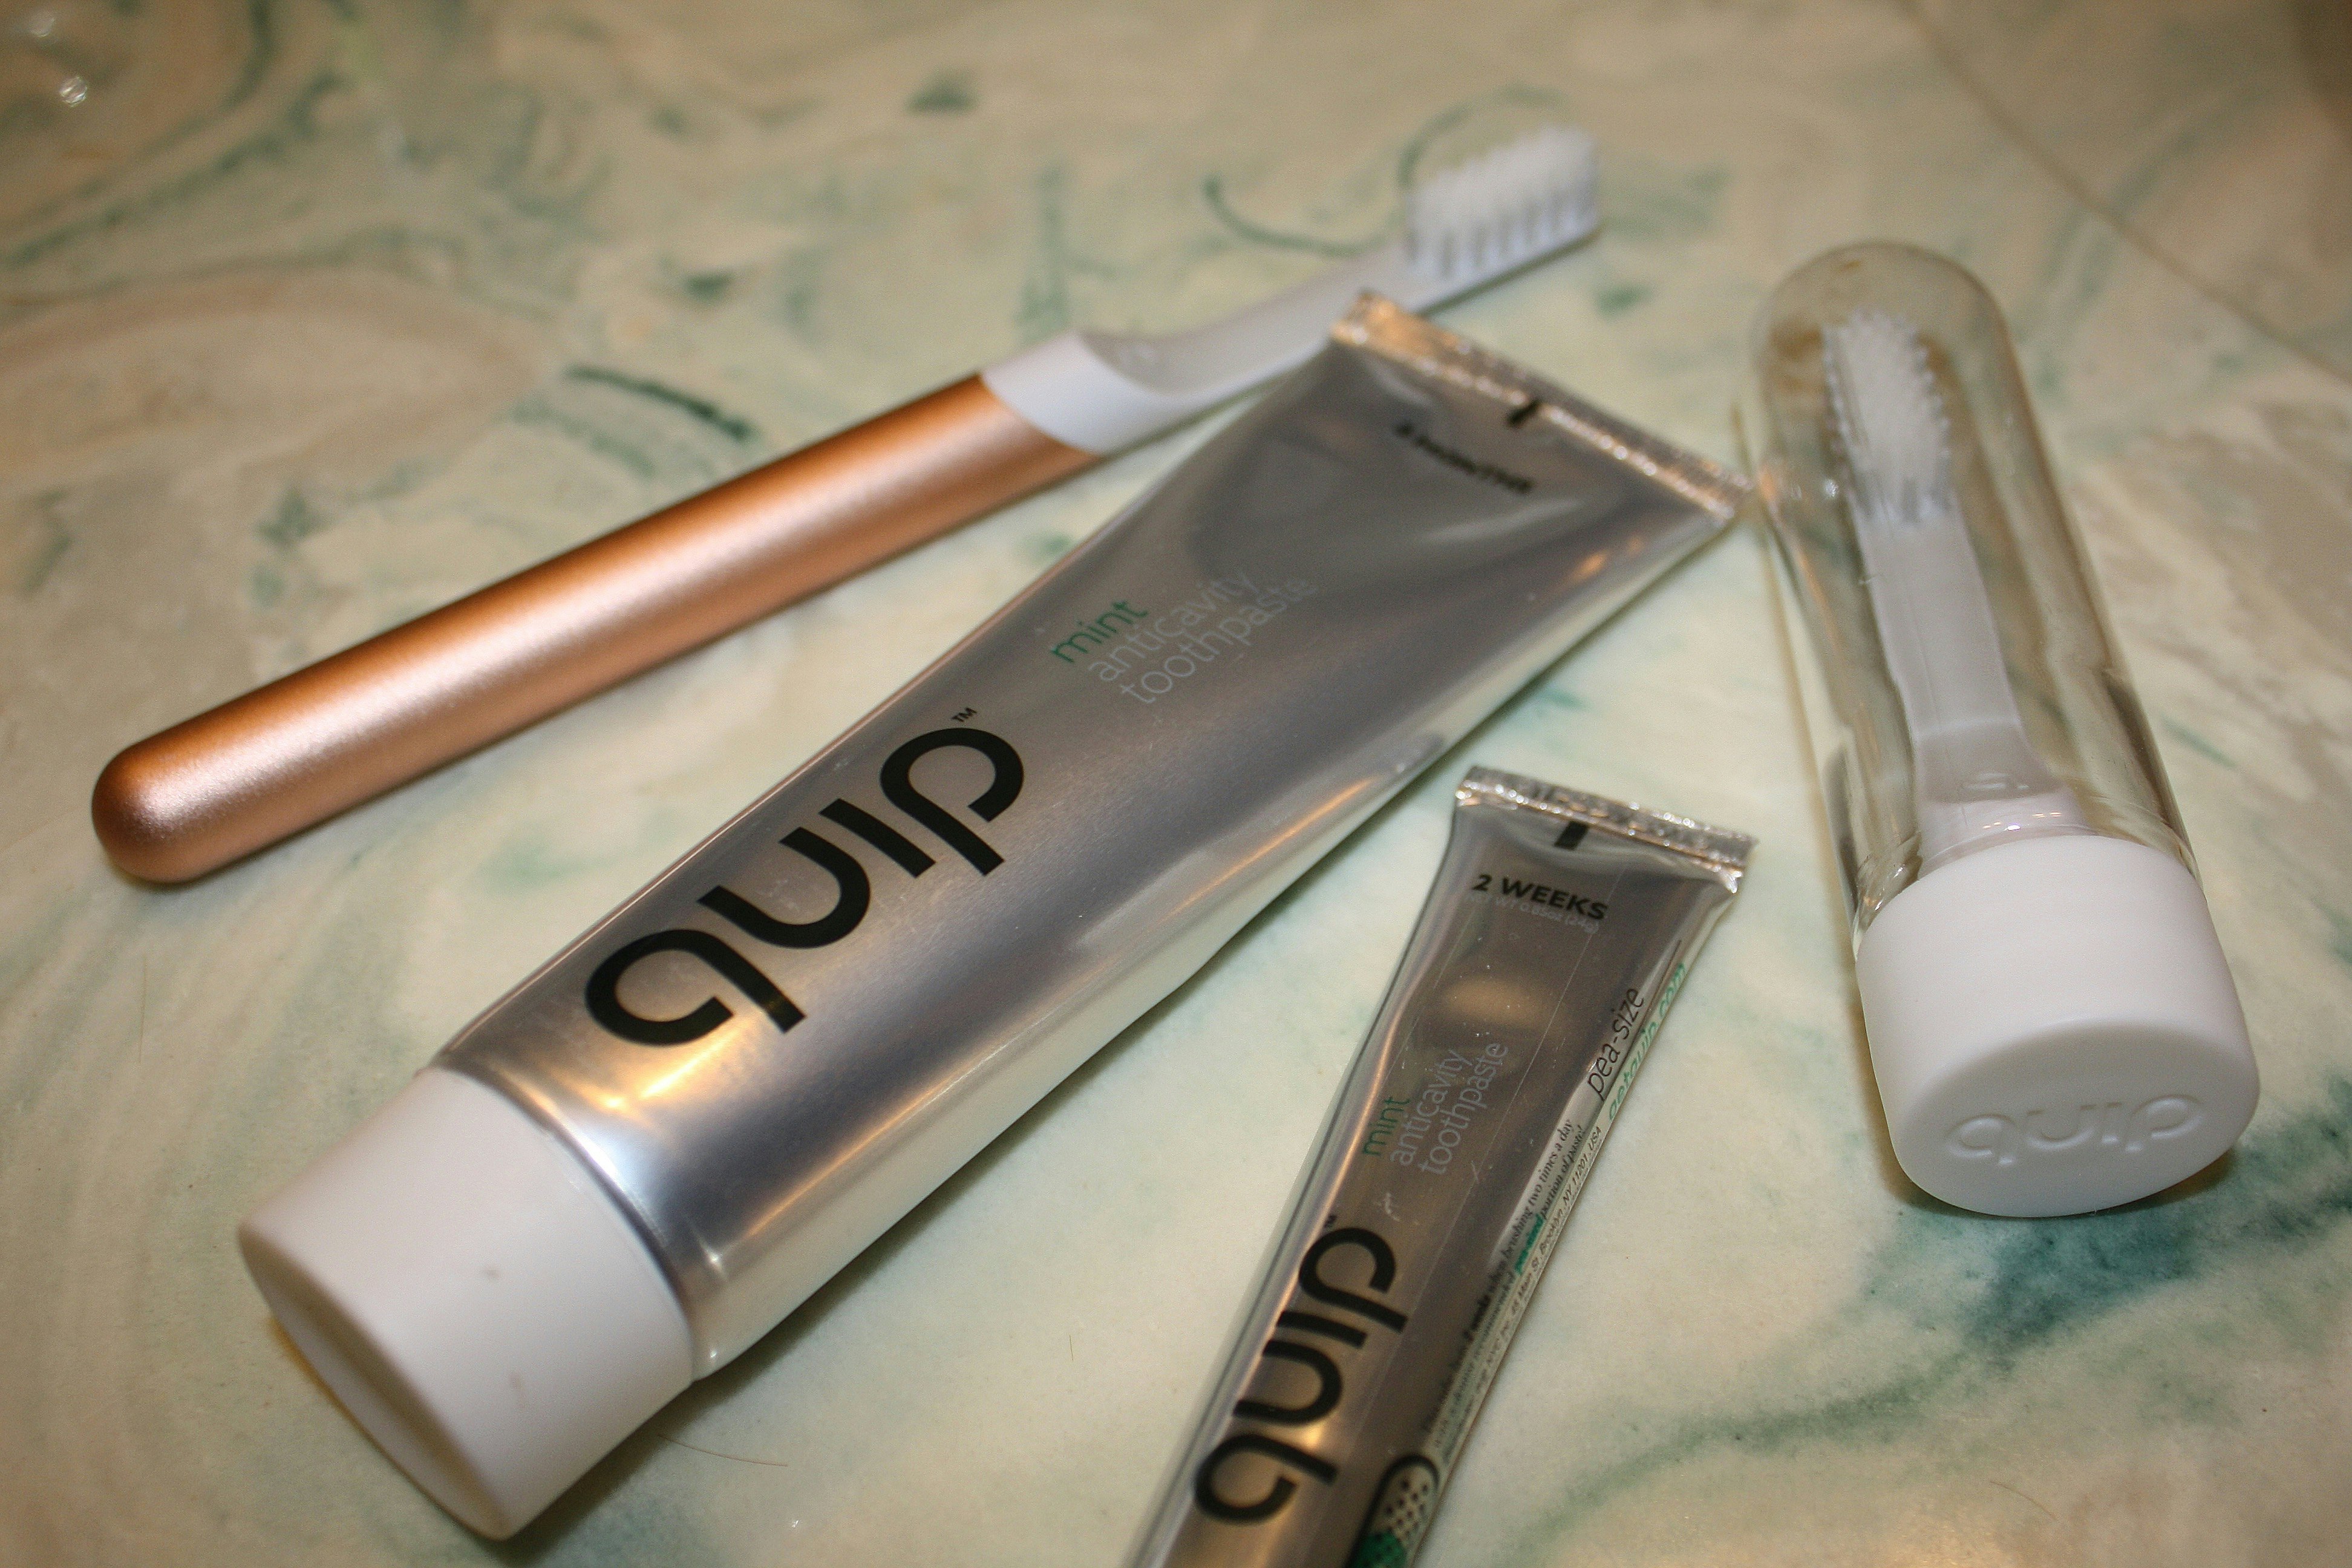 quip toothbrush refill